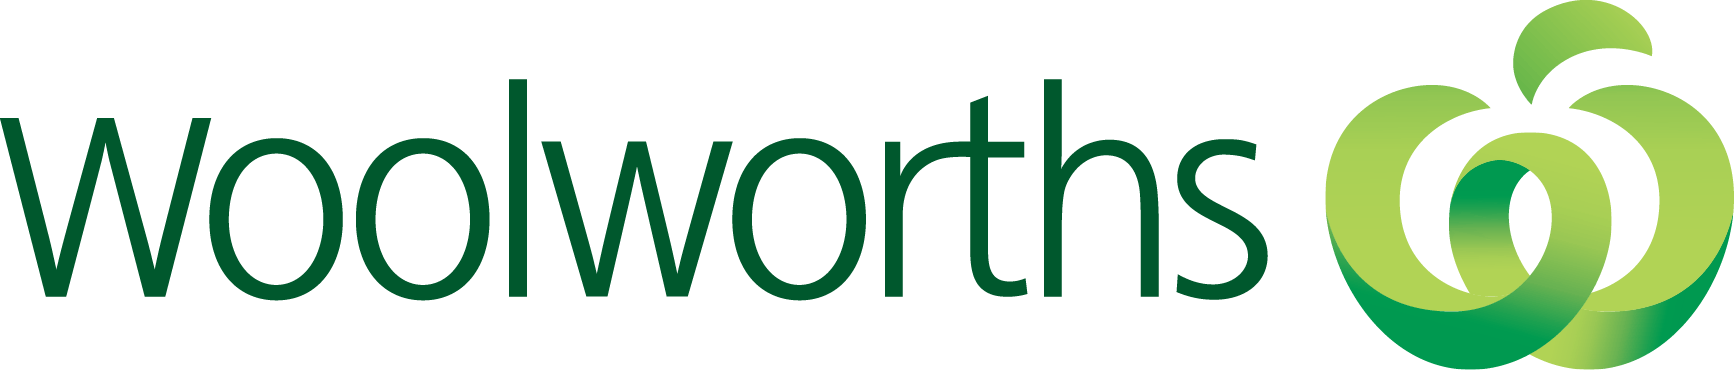 Woolworths Logo png